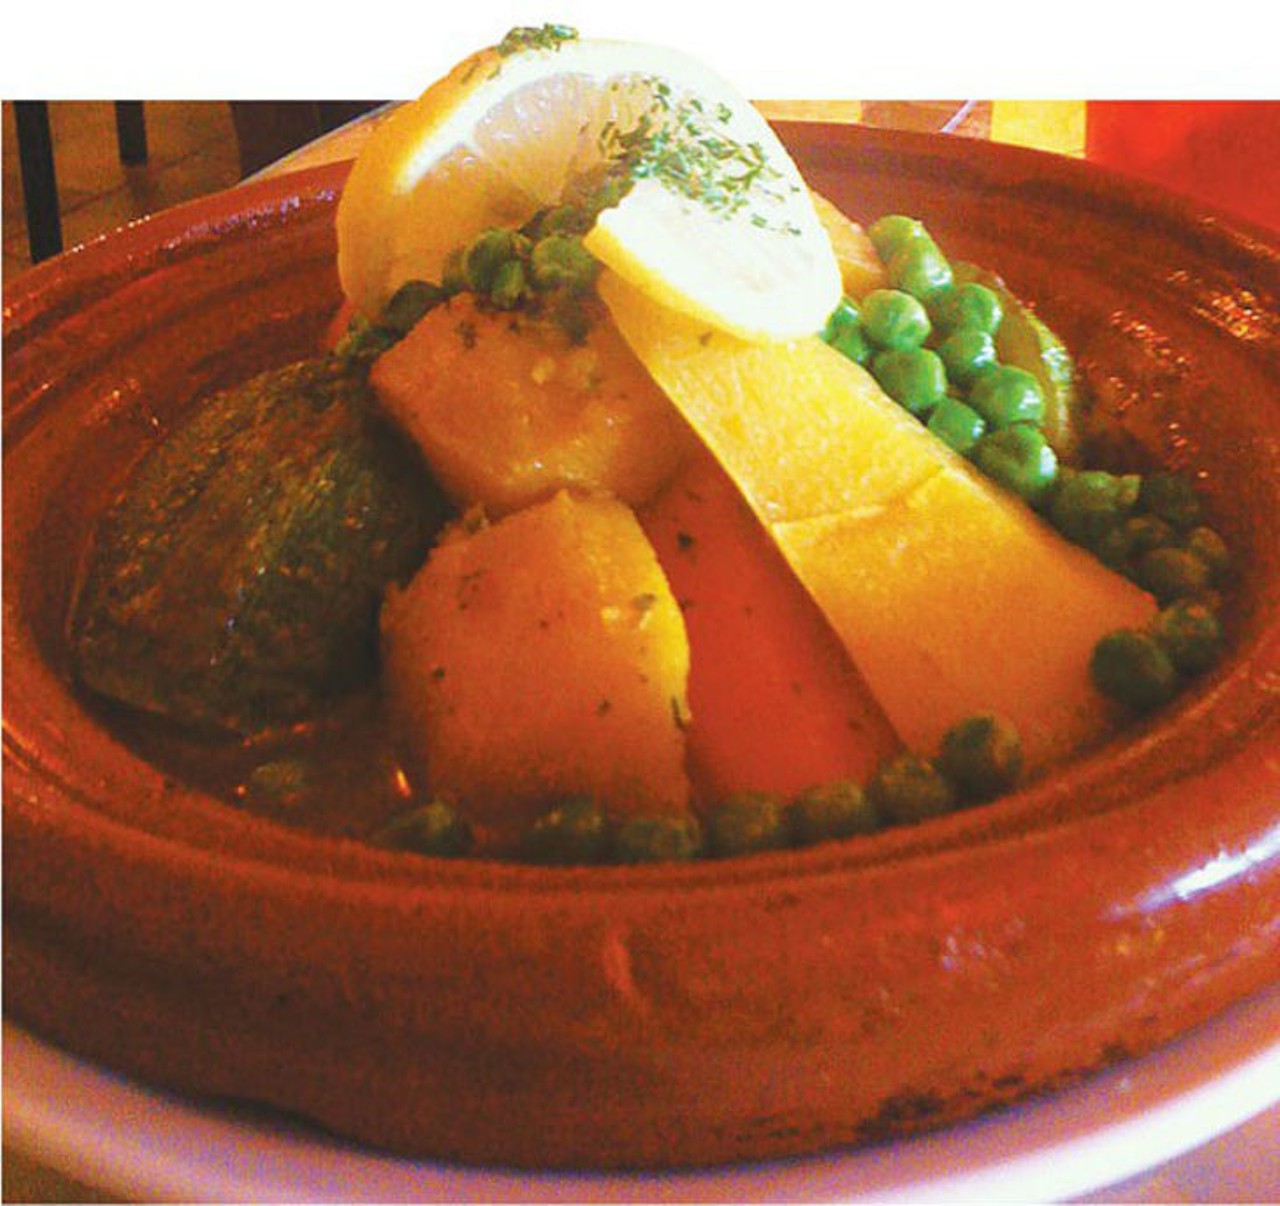 Vegetable tagine from Moroccan Bites
The pile of seasonal vegetables form a pyramid of squash, carrots, peas, and potatoes atop a pool of steaming hot broth. Simple, savory, and a touch peppery. 
Moroccan Bites, 5714 Evers Rd., (210) 706-9700, moroccanbitescuisine.com. 
Photo via San Antonio Current